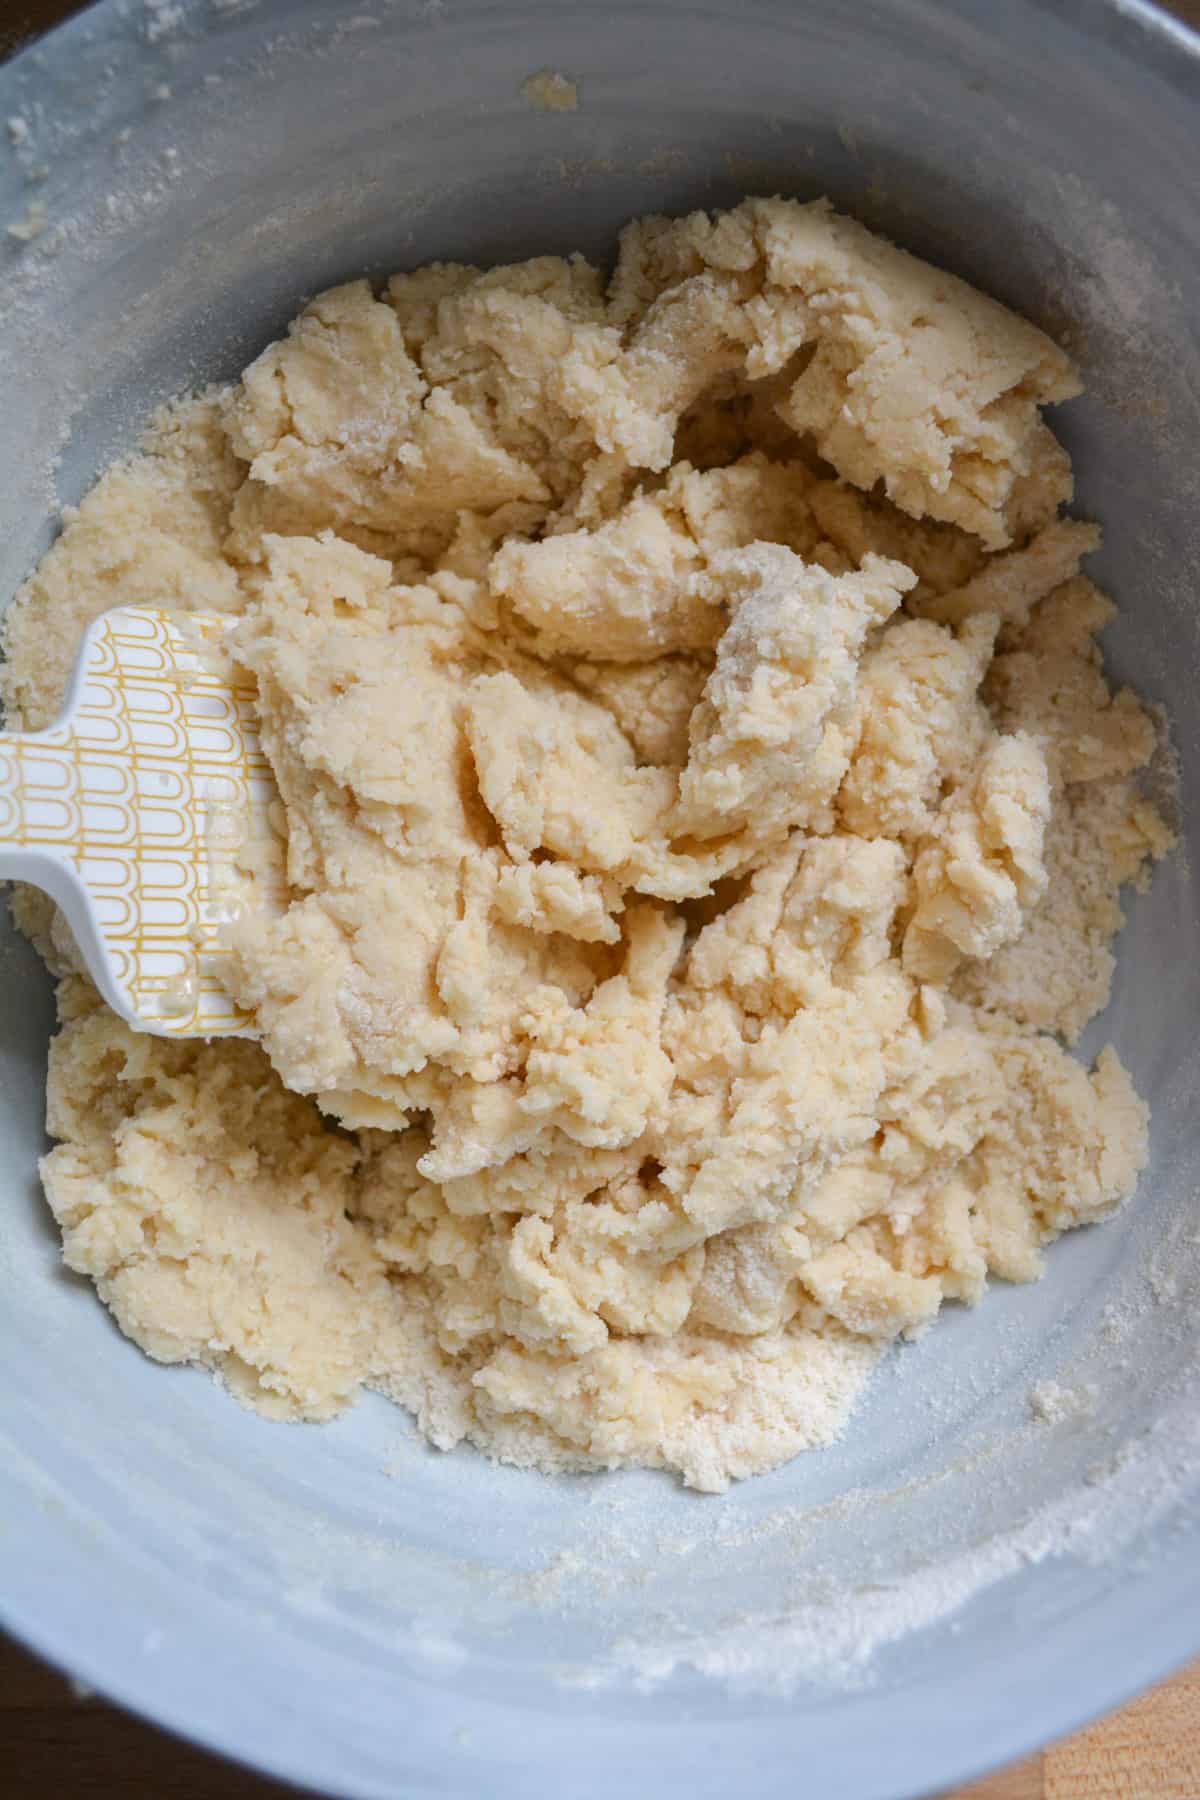 Mixing the dry ingredients into the cookie dough